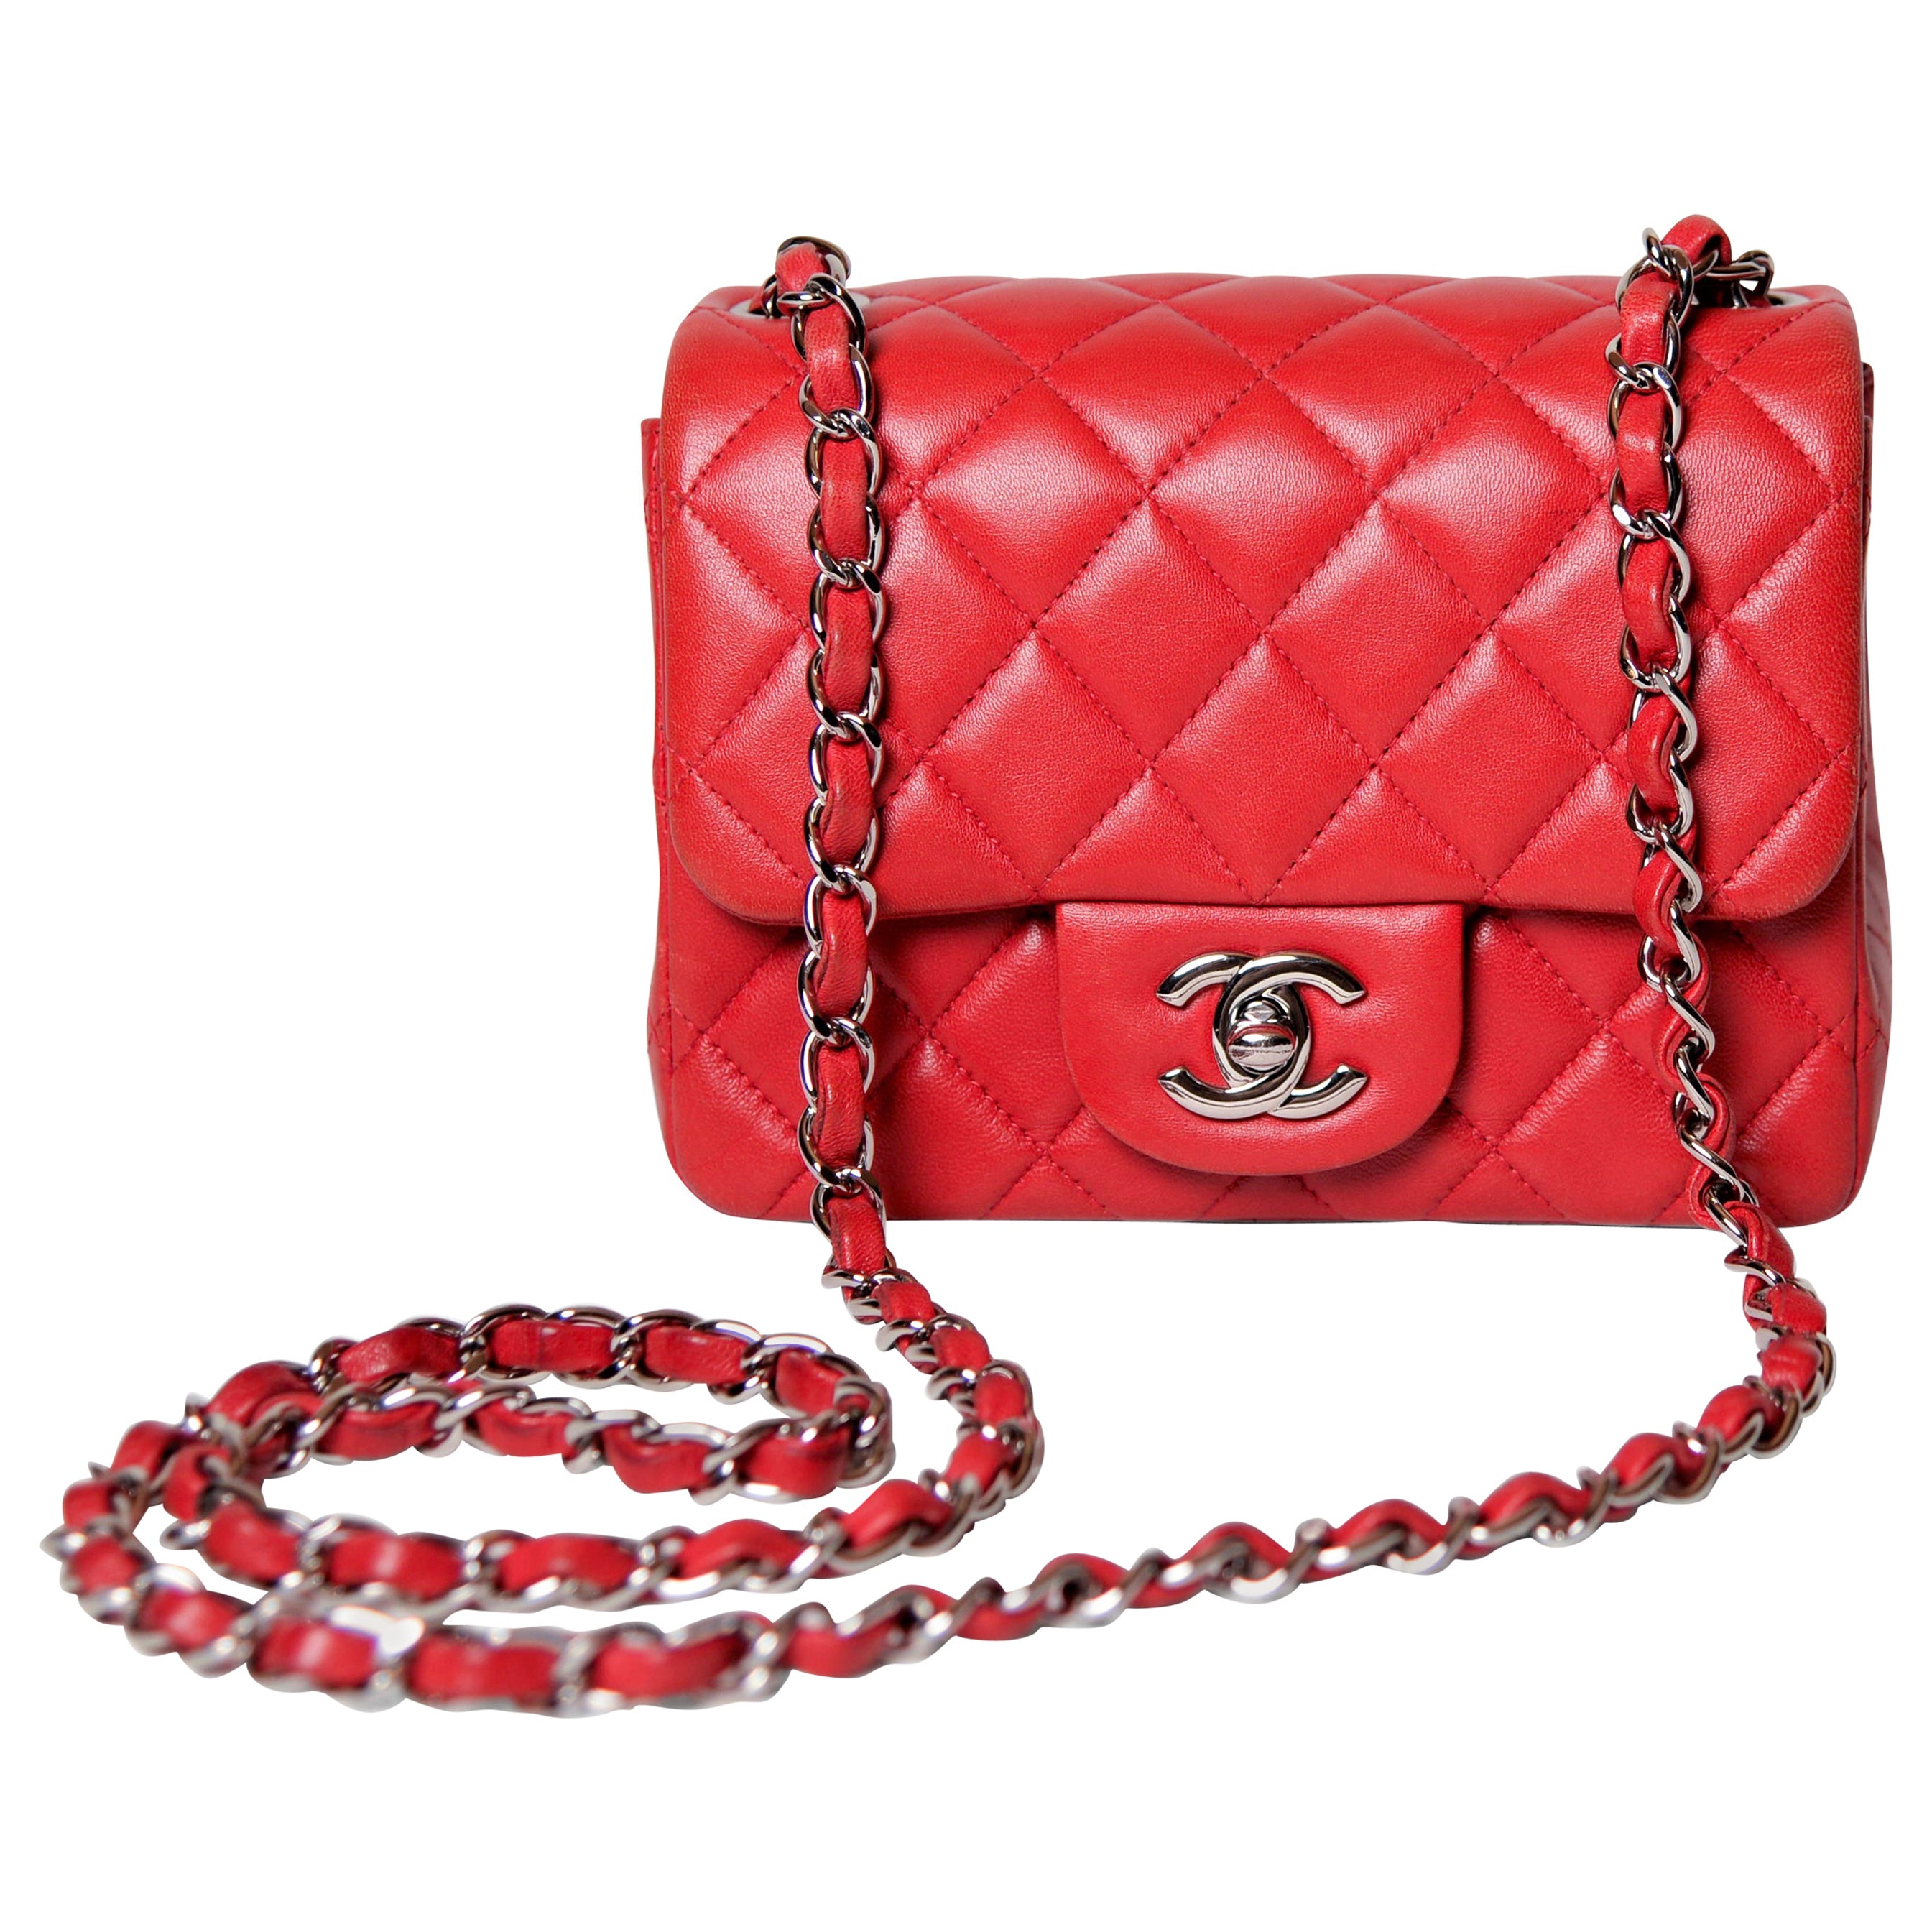 Chanel Red Quilted Lambskin Leather Mini Flap Bag at 1stDibs  chanel red  small flap bag, chanel red mini flap bag, chanel red bag mini